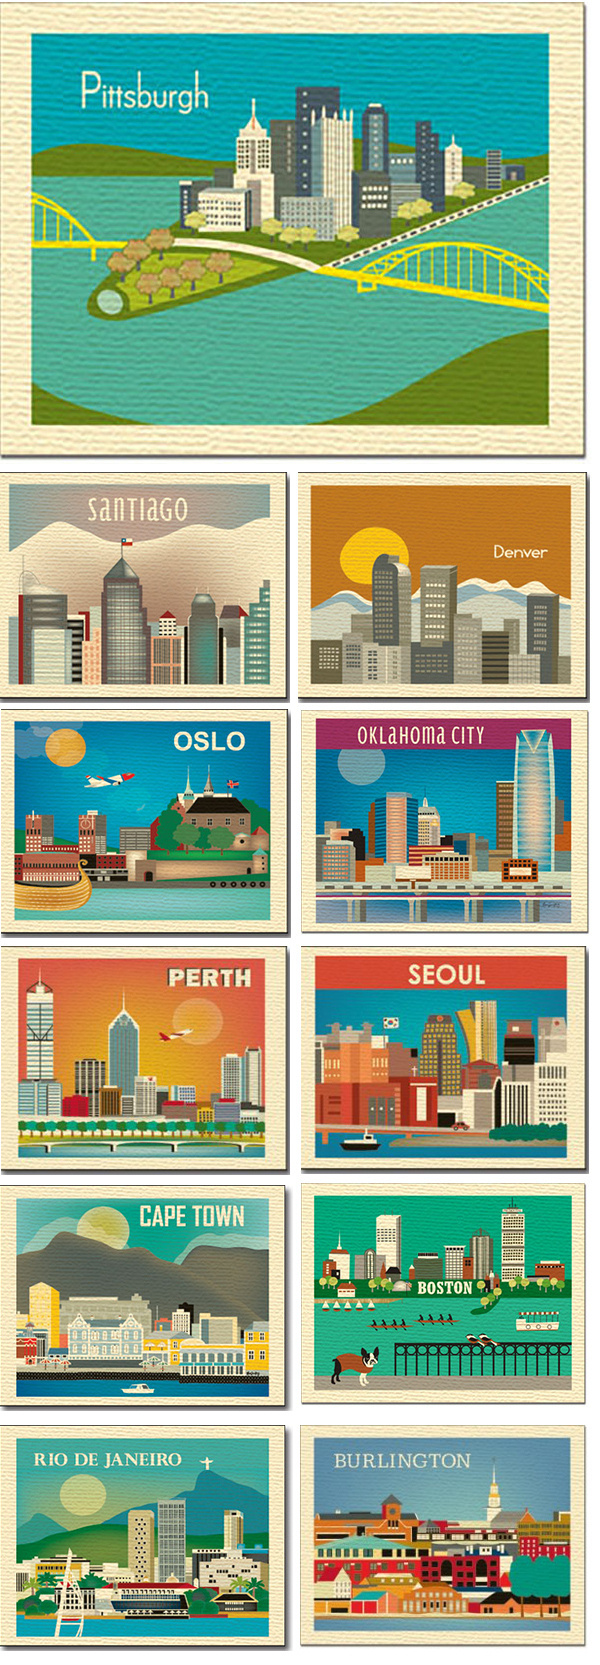 City skyline illustrations by Loose Petals #city #illustrations #skyline